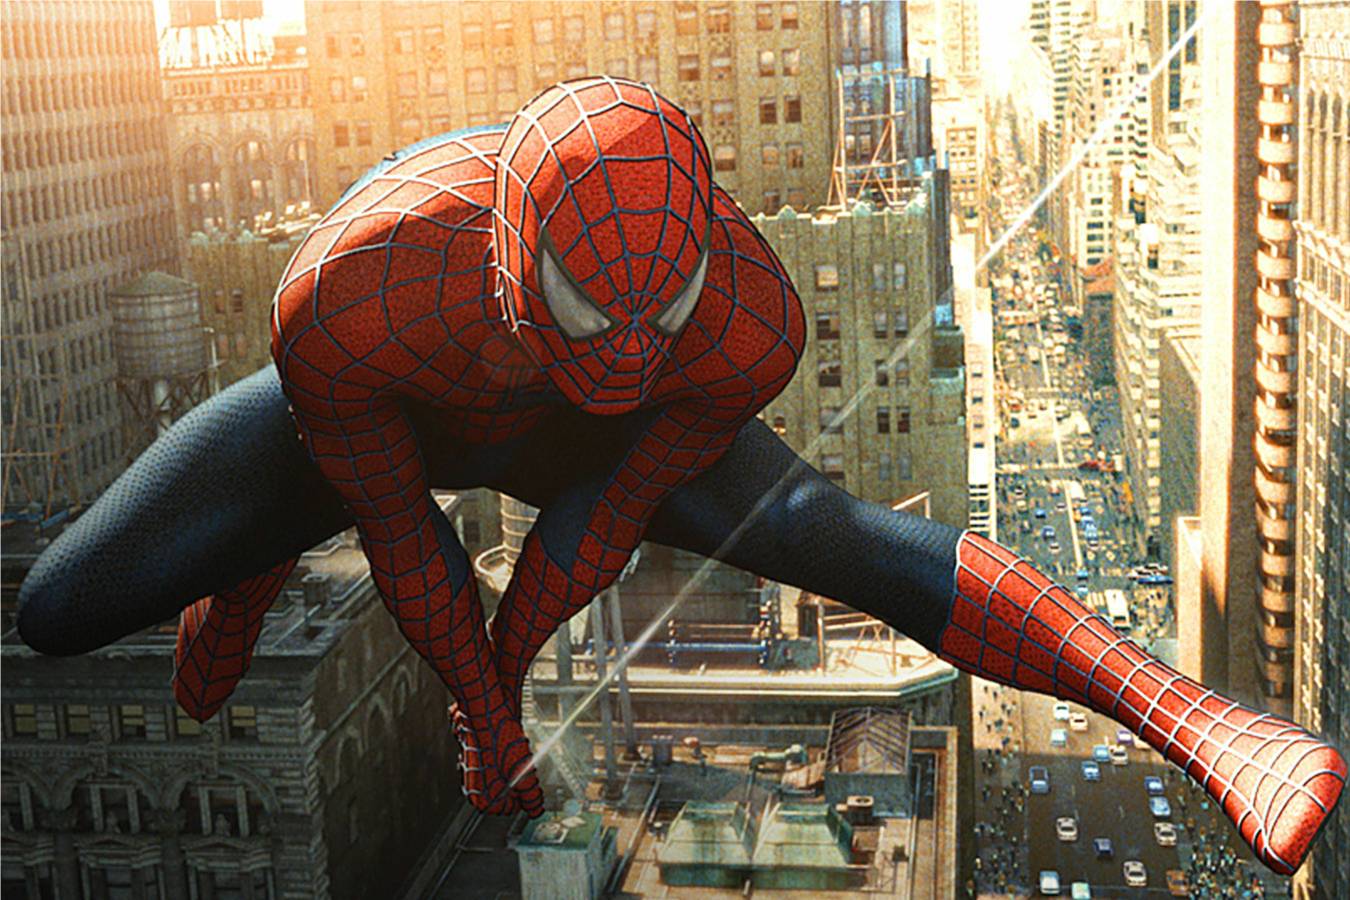 Awesome Spiderman wallpaper Spiderman wallpapers